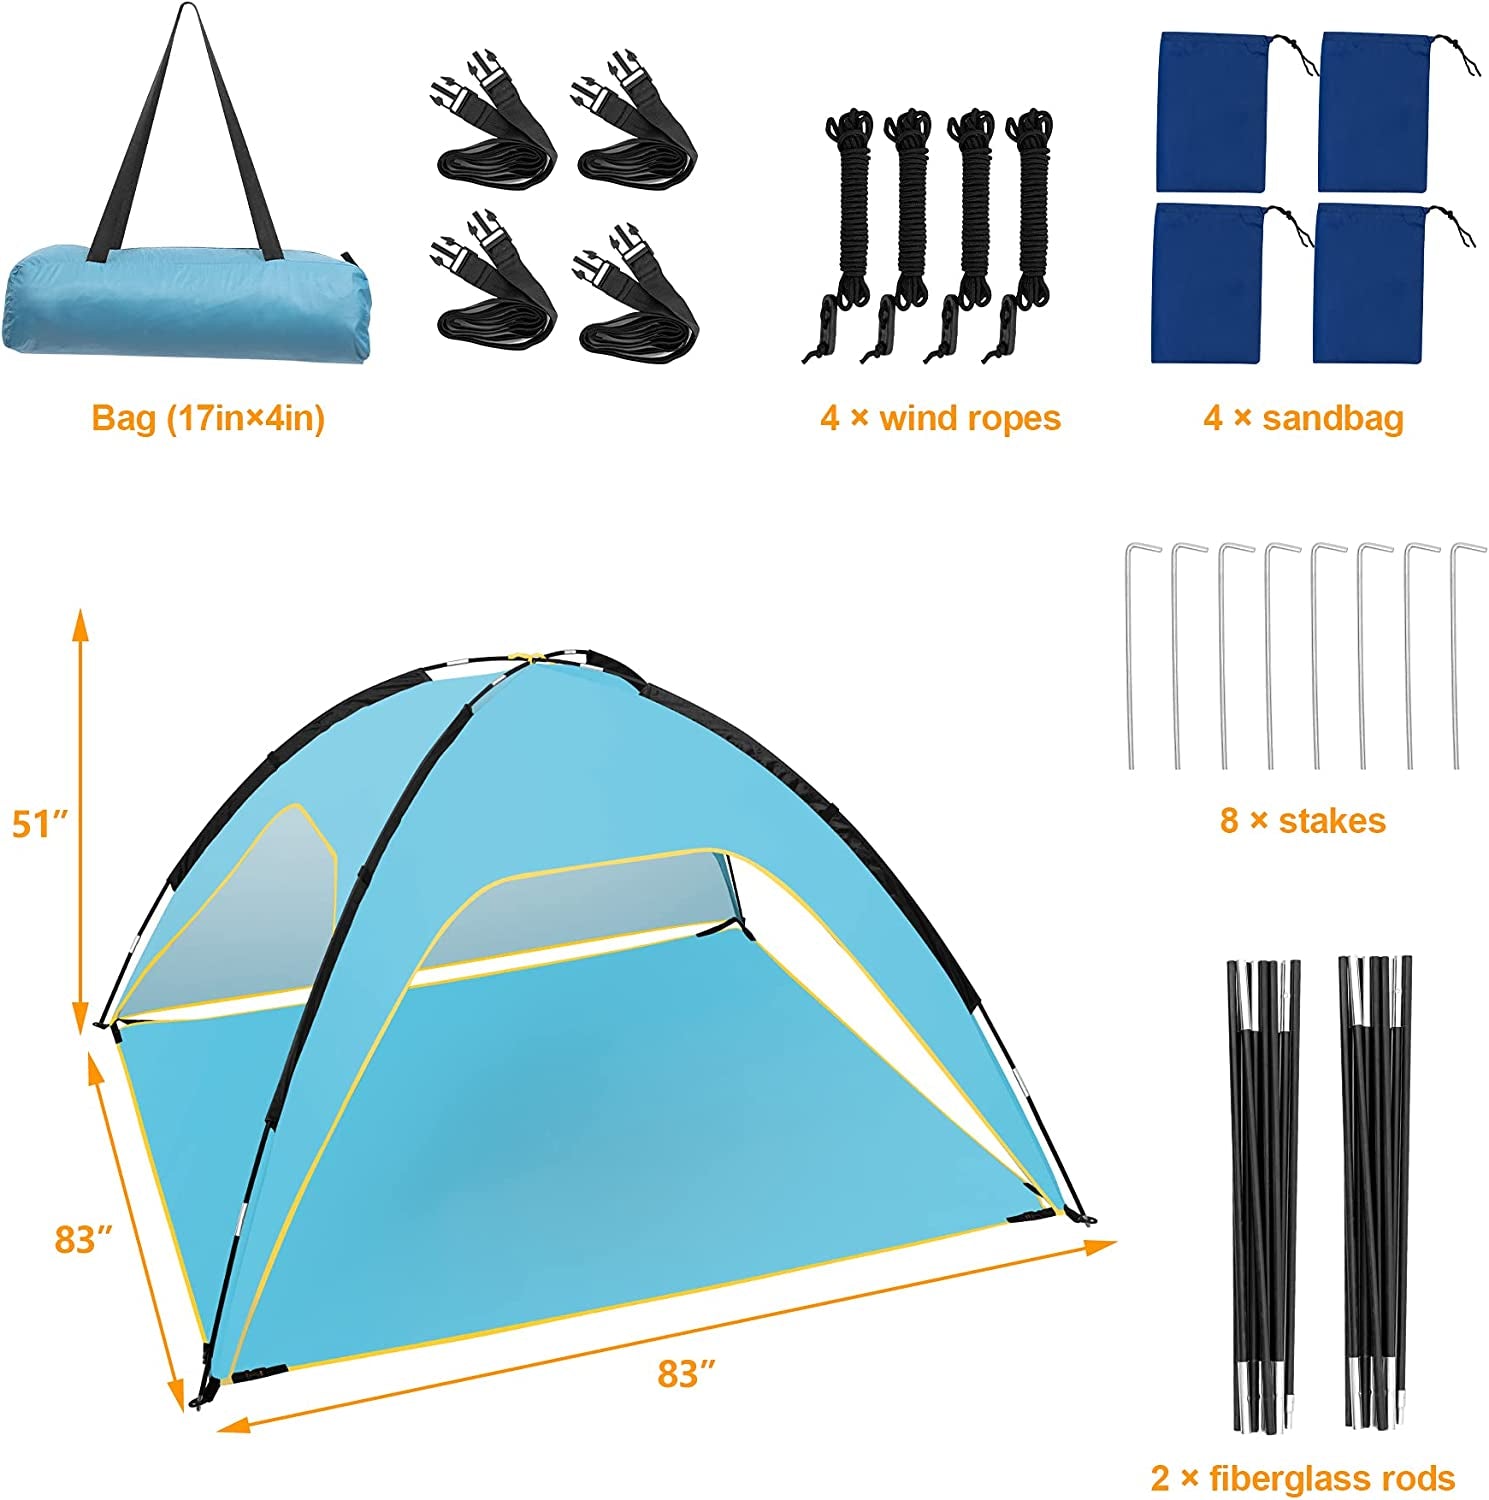 Beach Tent, Portable Beach Sun Shelter for UPF 50+ UV Protection, Easy Set up 3-4 Person Beach Tent Shade with Carry Bag, anti UV Beach Canopy Tent for Fishing Hiking Camping